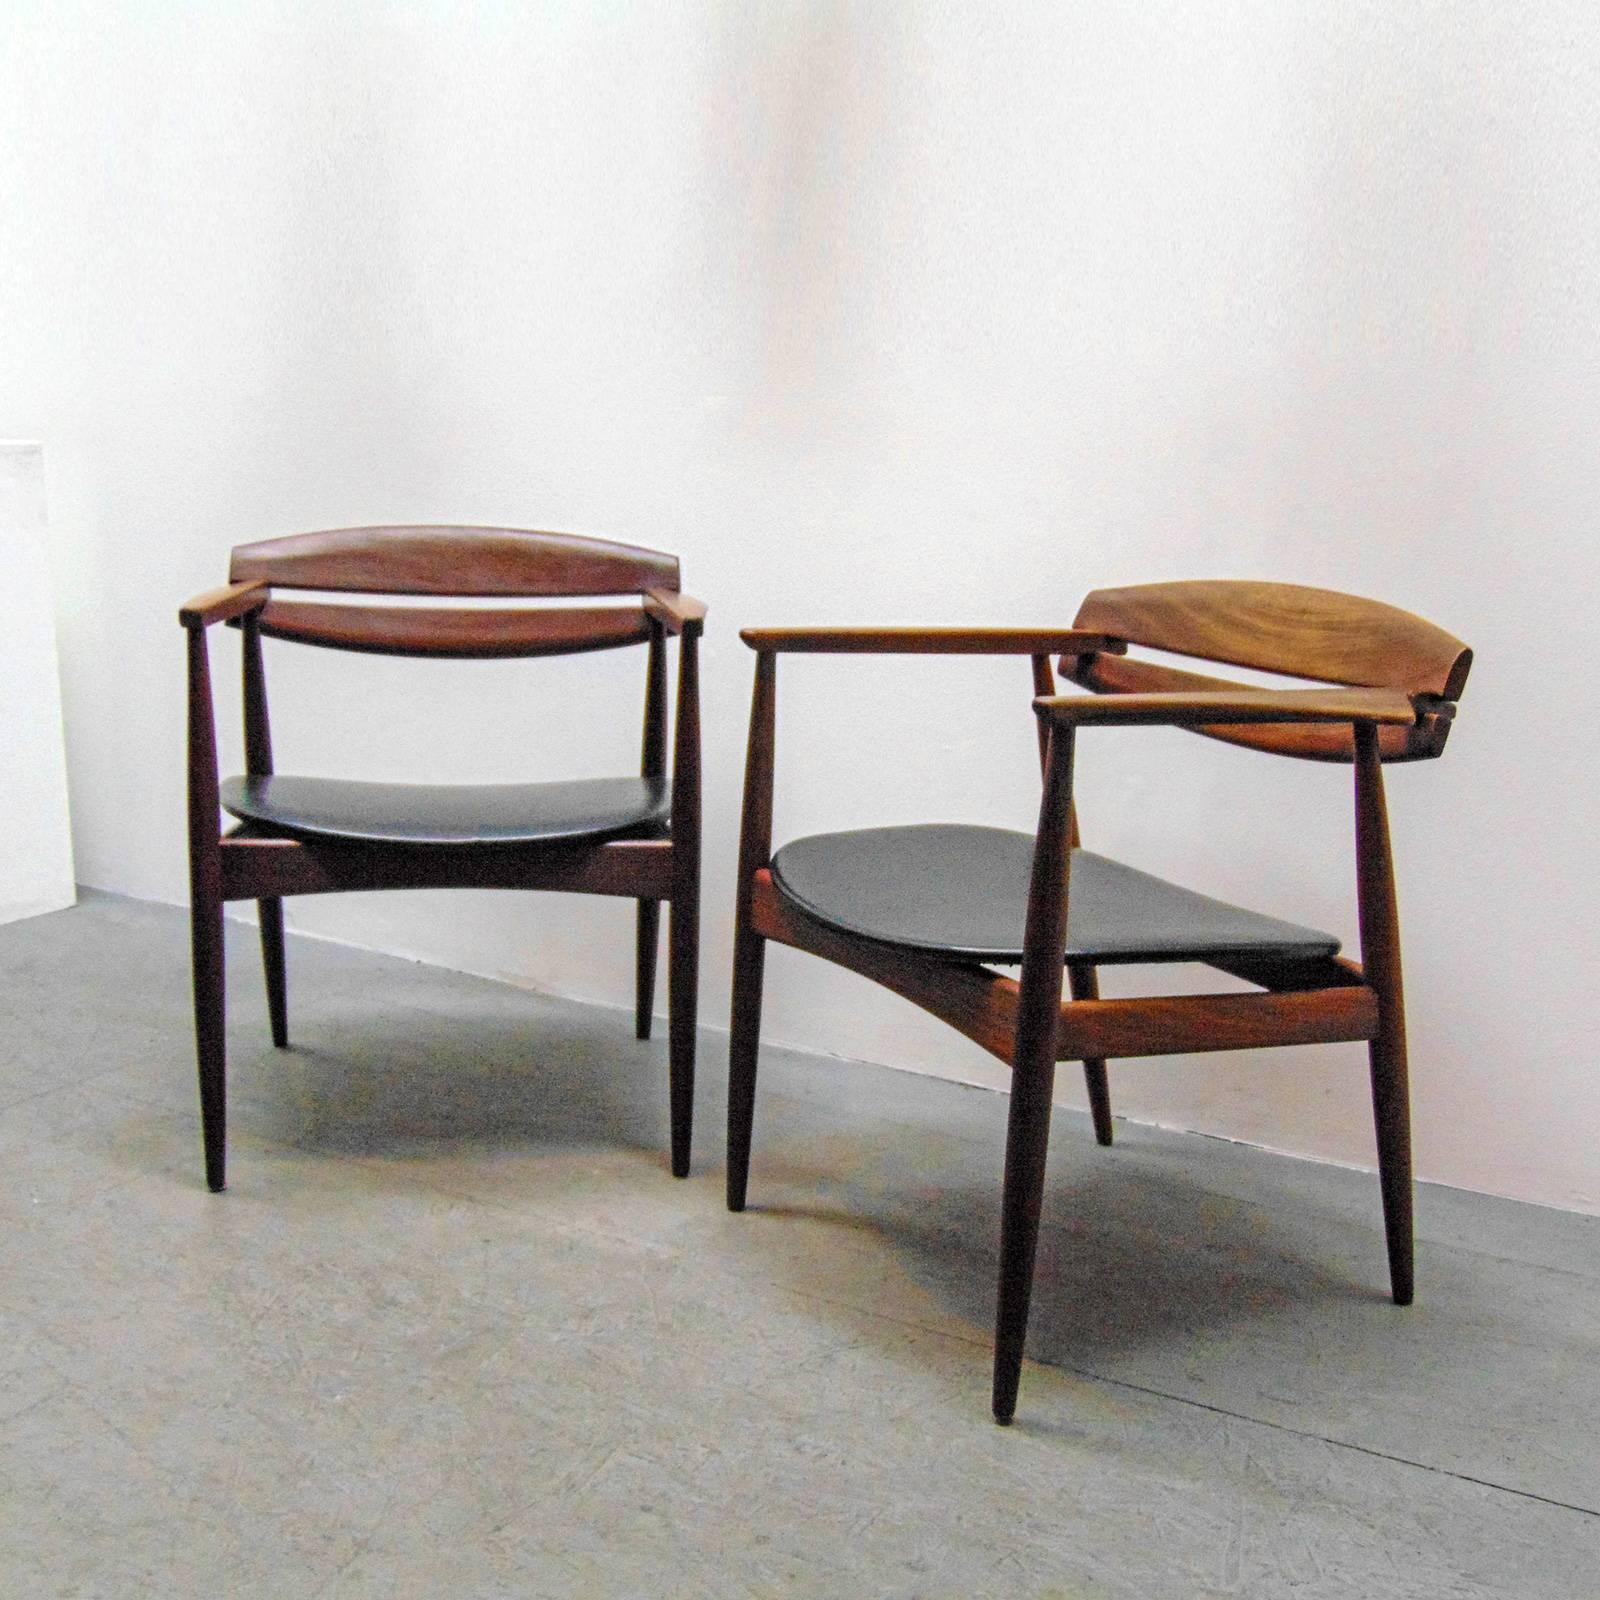 Faux Leather Sculptural Teak Armchairs by John Sylvester